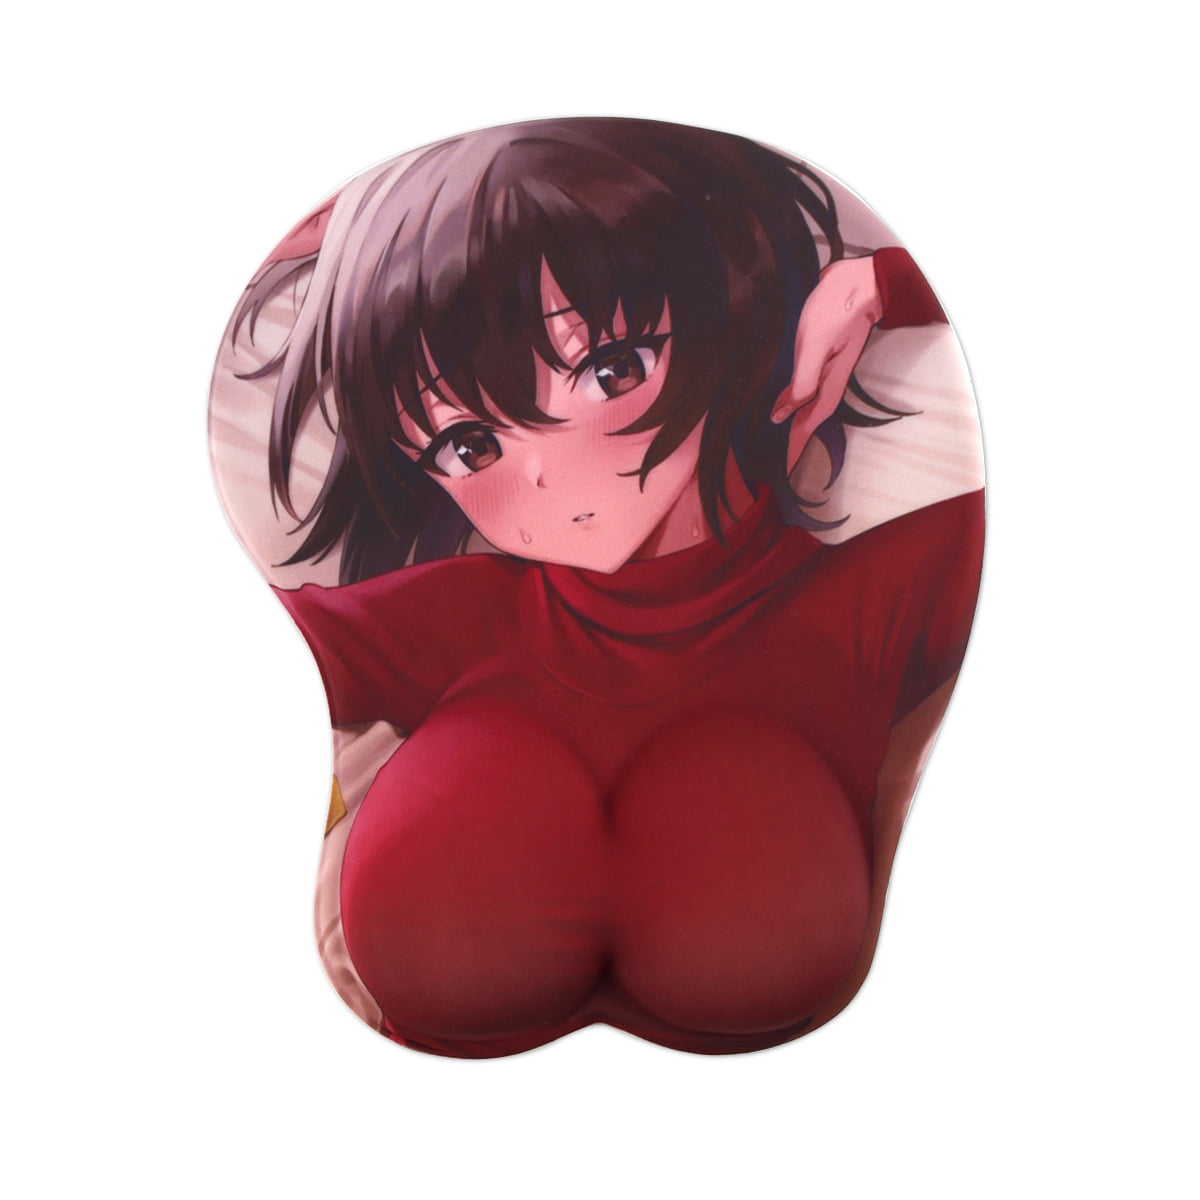 Cute Teen Breasts - Cute Soft Sexy Cartoon Girl 3D Big Breast Boobs Silicone Wrist Rest Support  Mouse Pad Mat Gaming Mousepad-RJ-027 - Walmart.com